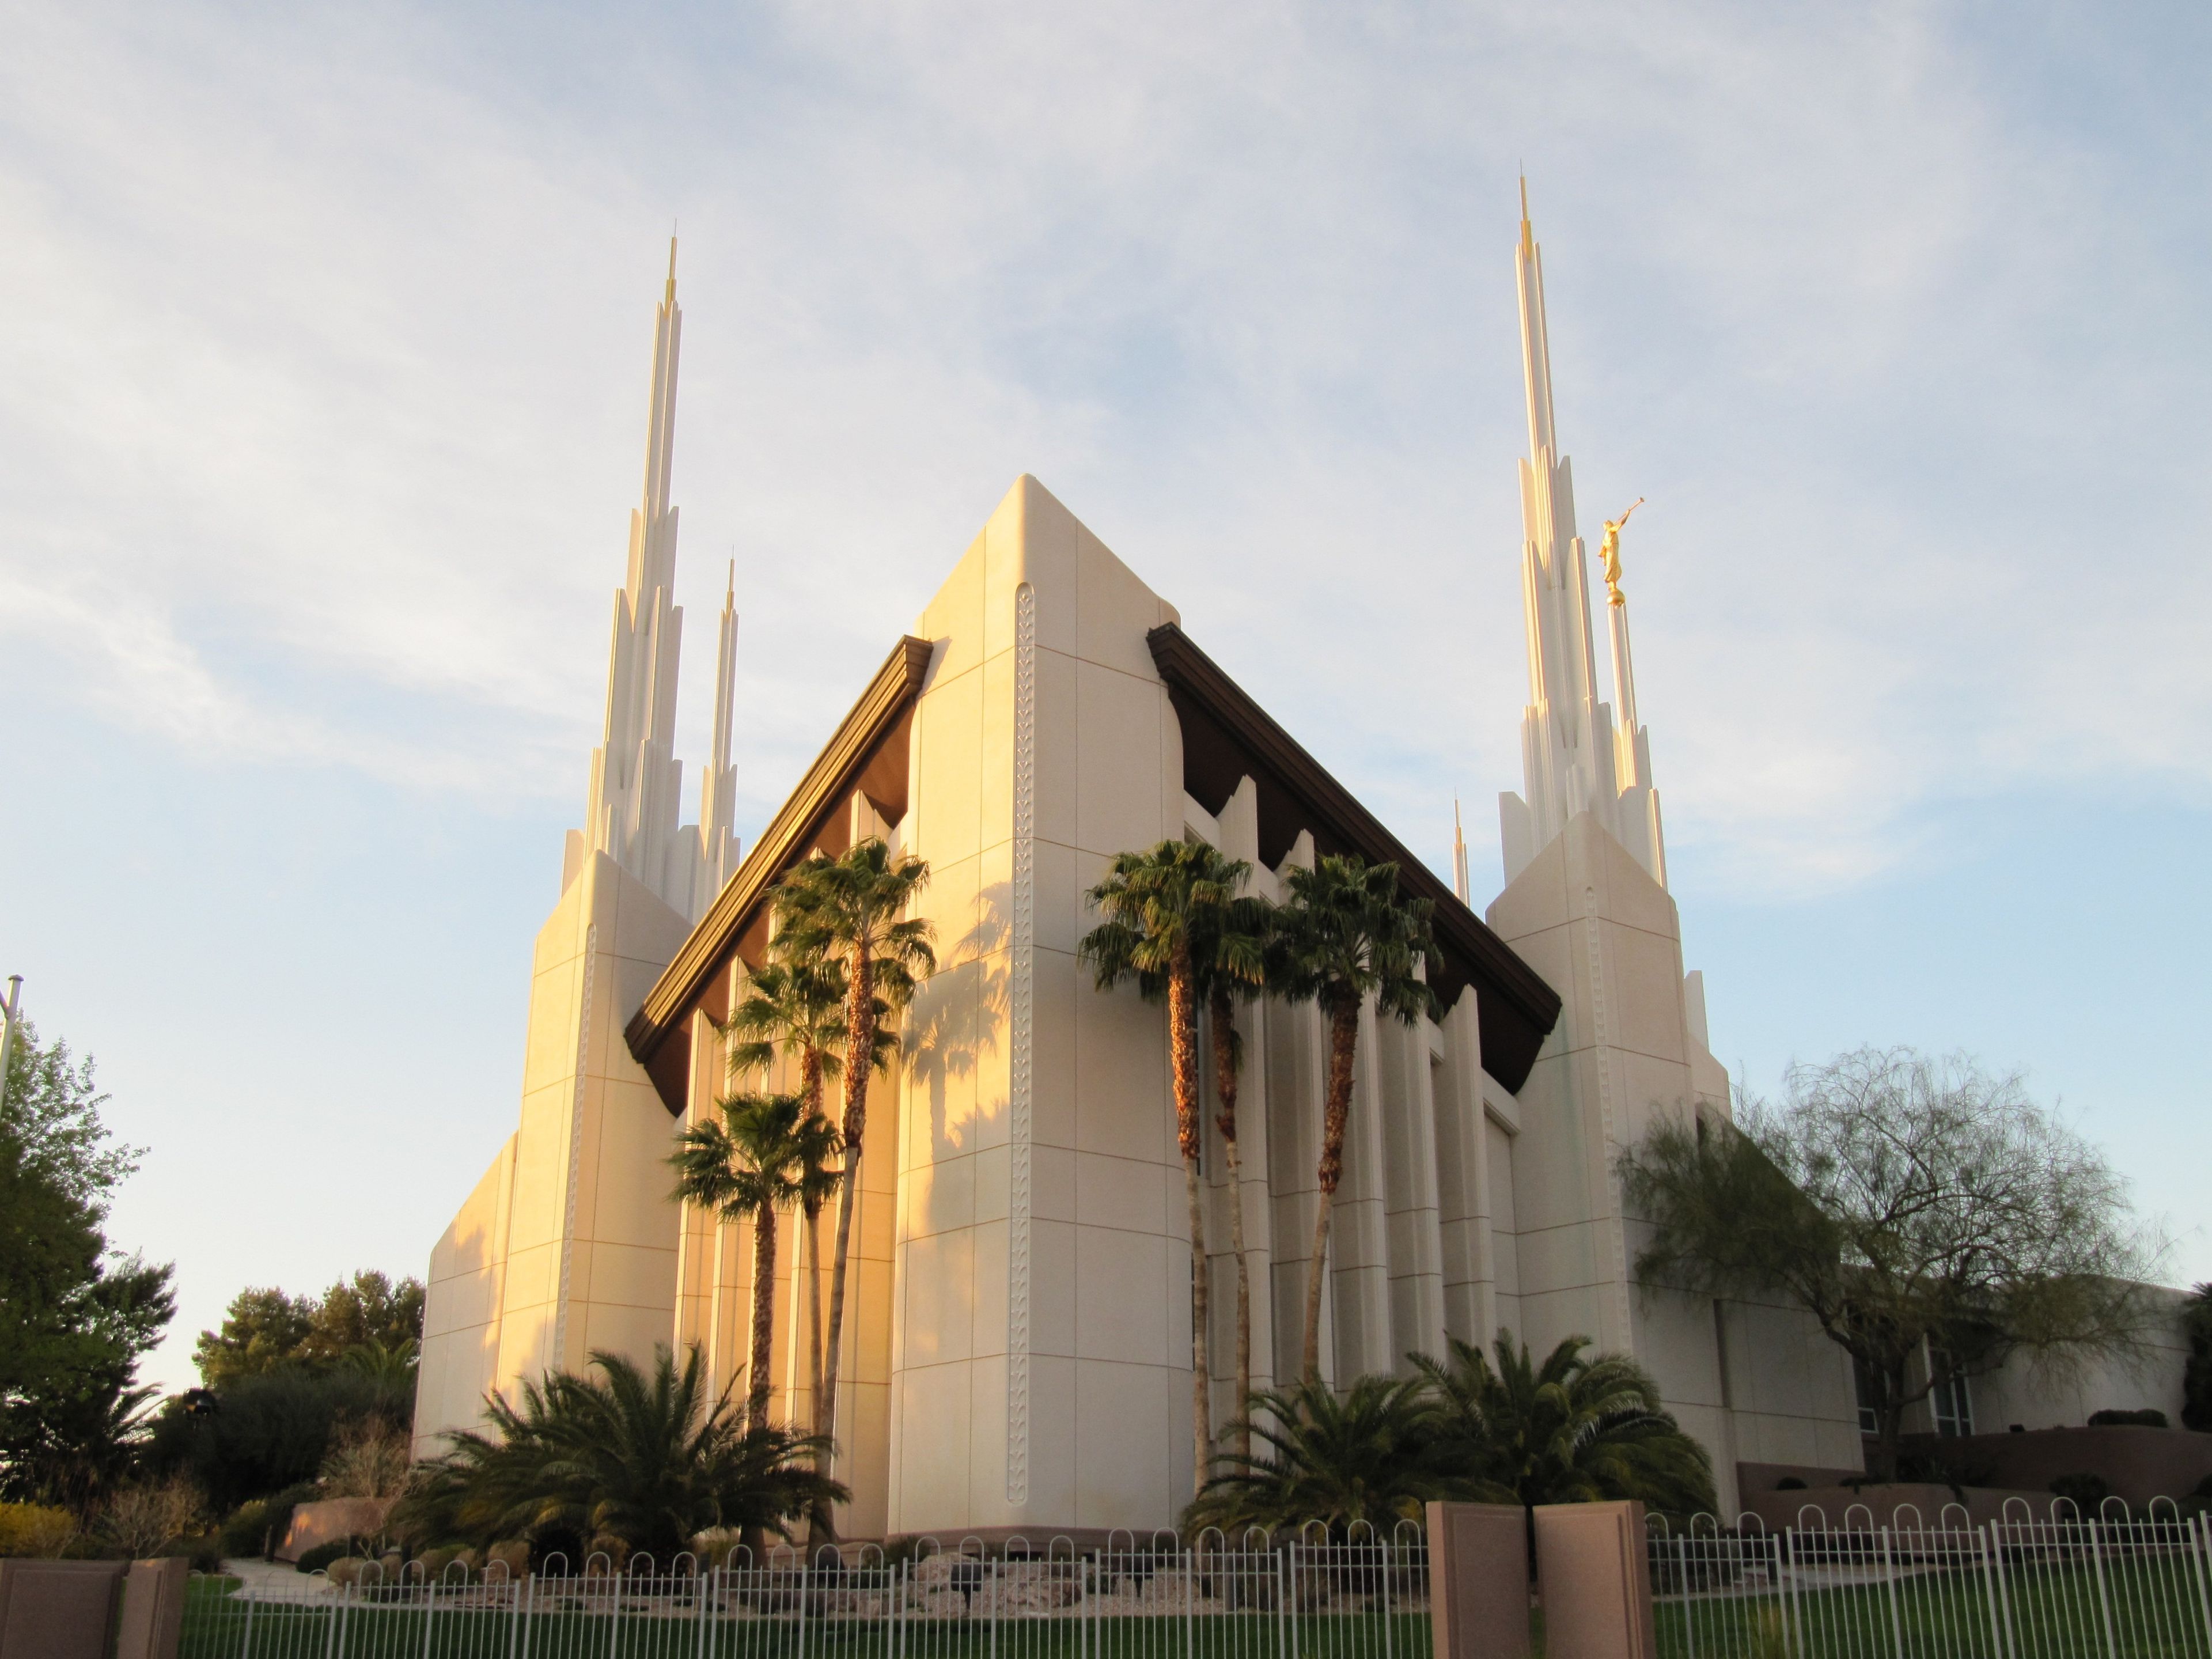 The front of the Las Vegas Nevada Temple, including scenery.